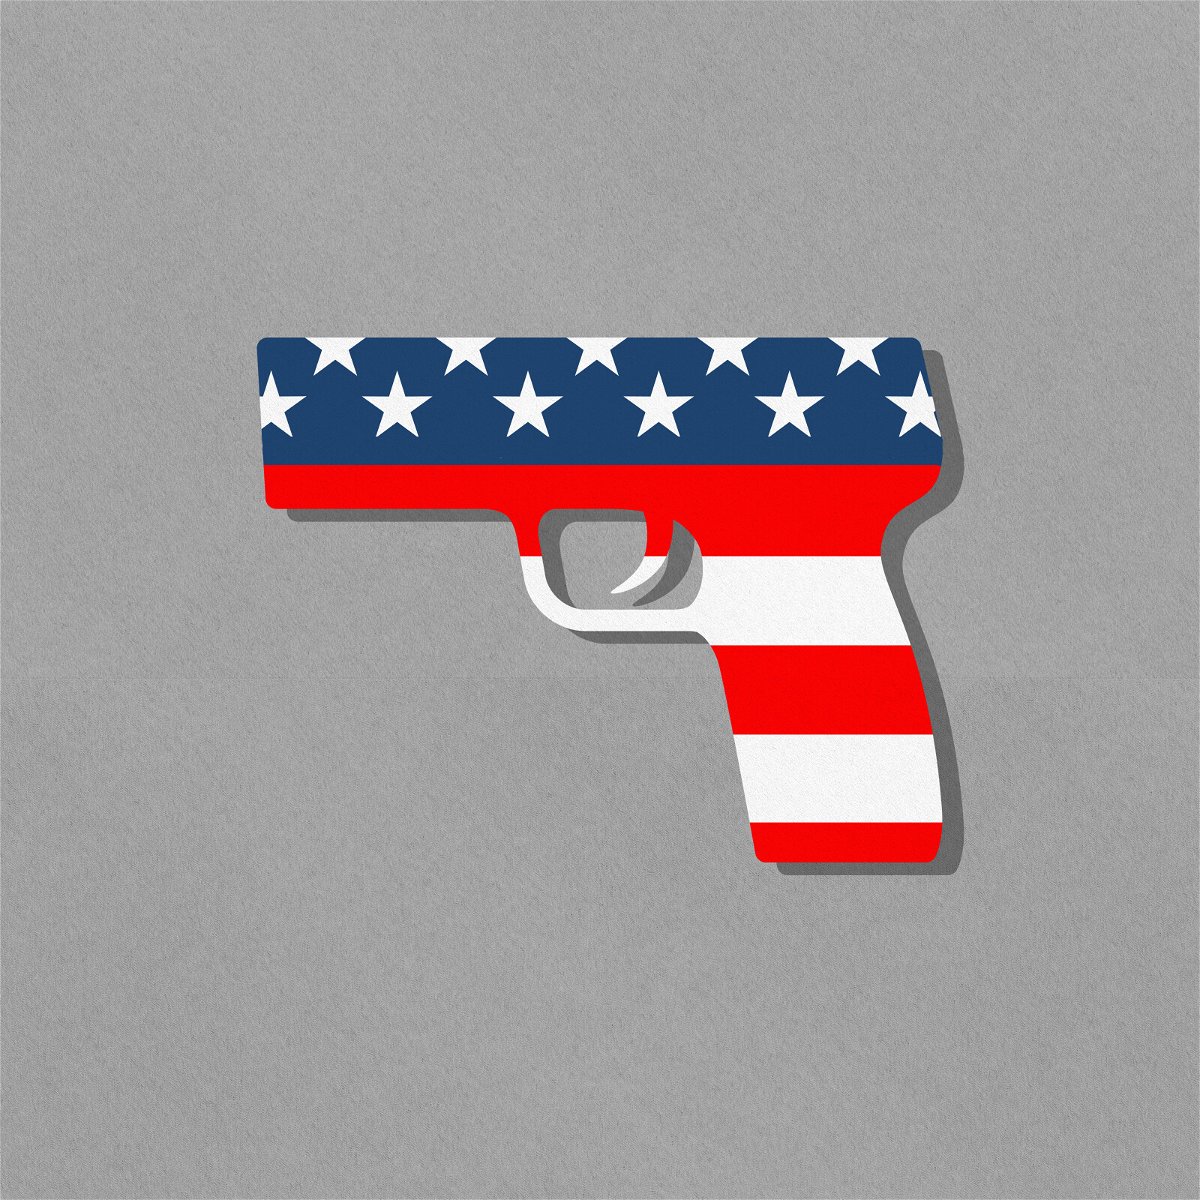 <i>CNN/Adobe Stock</i><br/>Several high-profile mass shootings and a sustained rise in gun violence across the United States in 2022 have spurred law enforcement officials and lawmakers to push for more gun control measures.